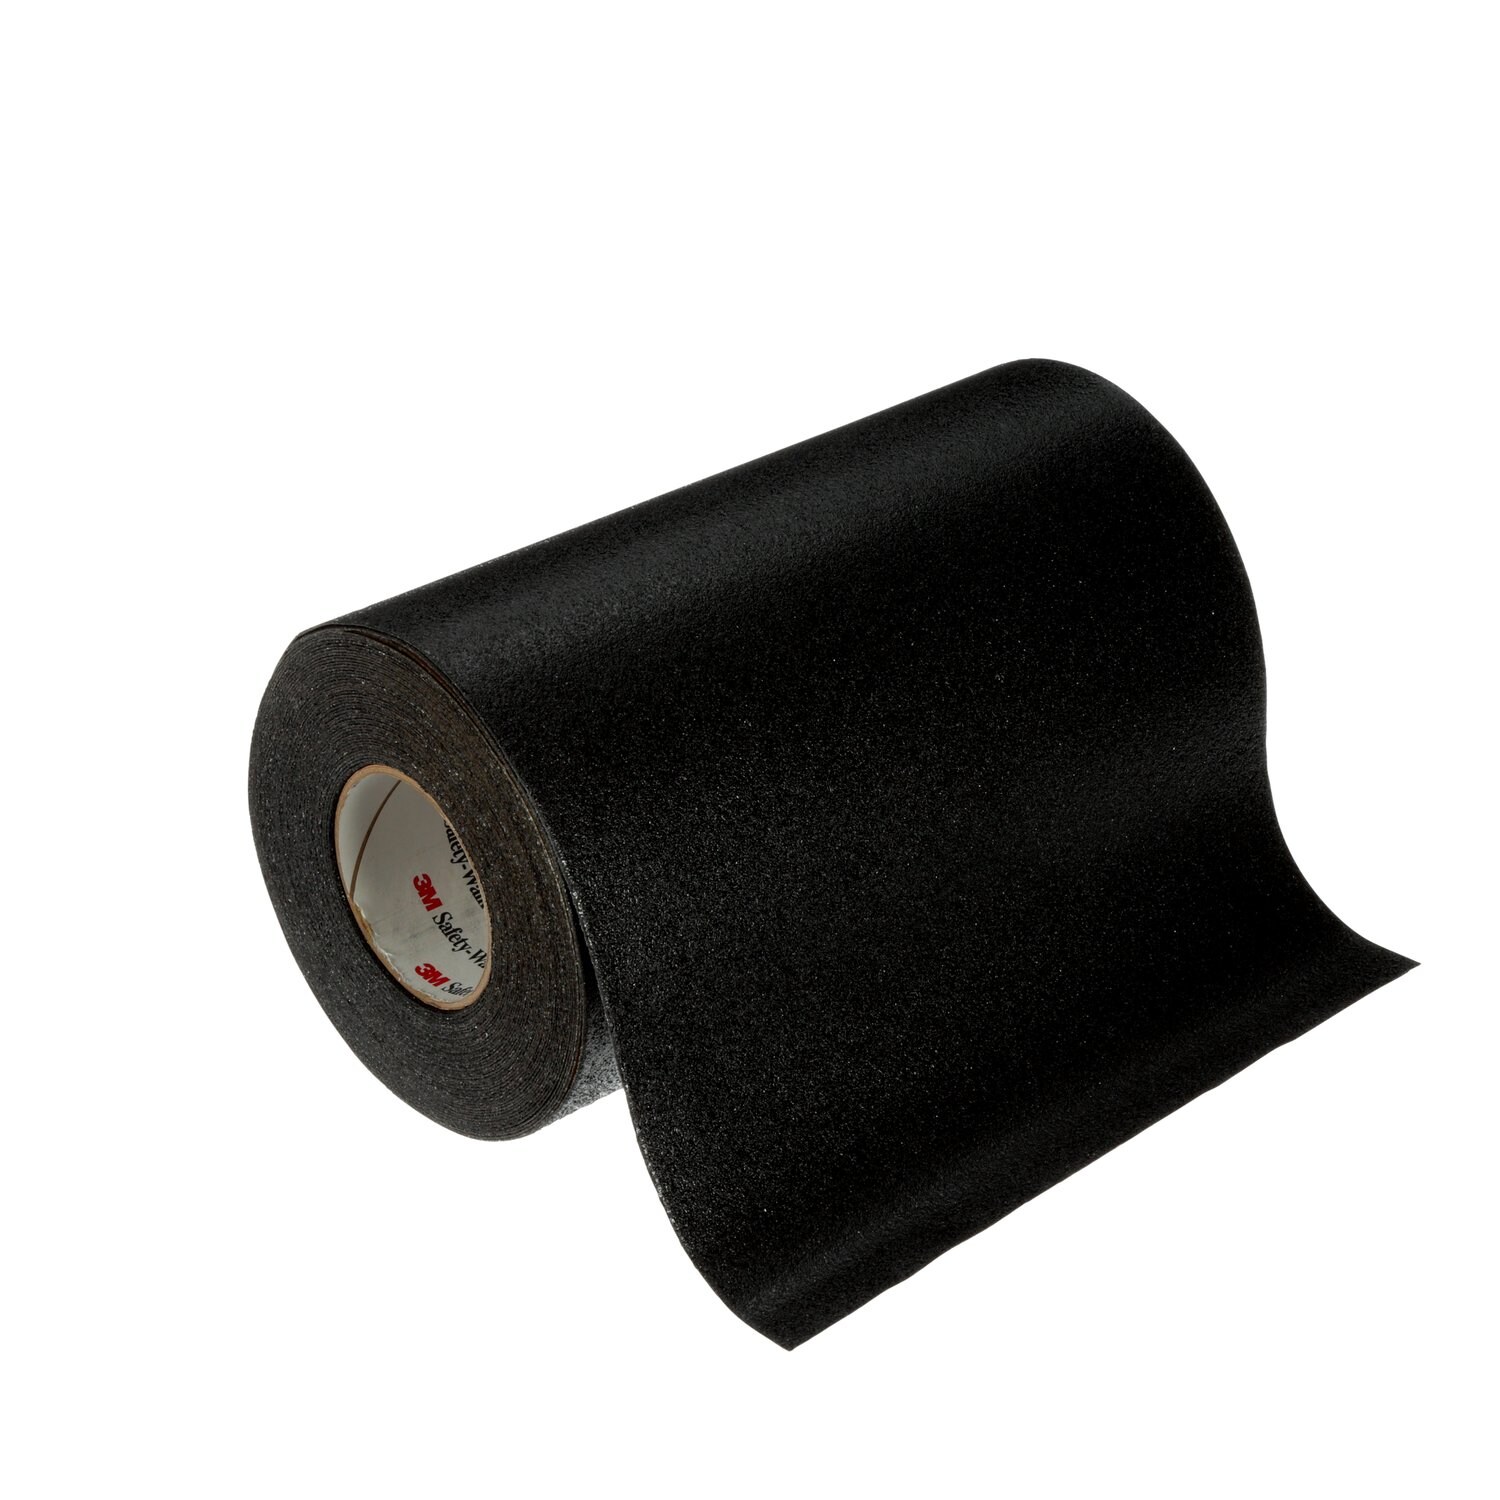 7000051948 - 3M Safety-Walk Slip-Resistant Conformable Tapes & Treads 510, Black,
12 in x 60 ft, Roll, 1/Case